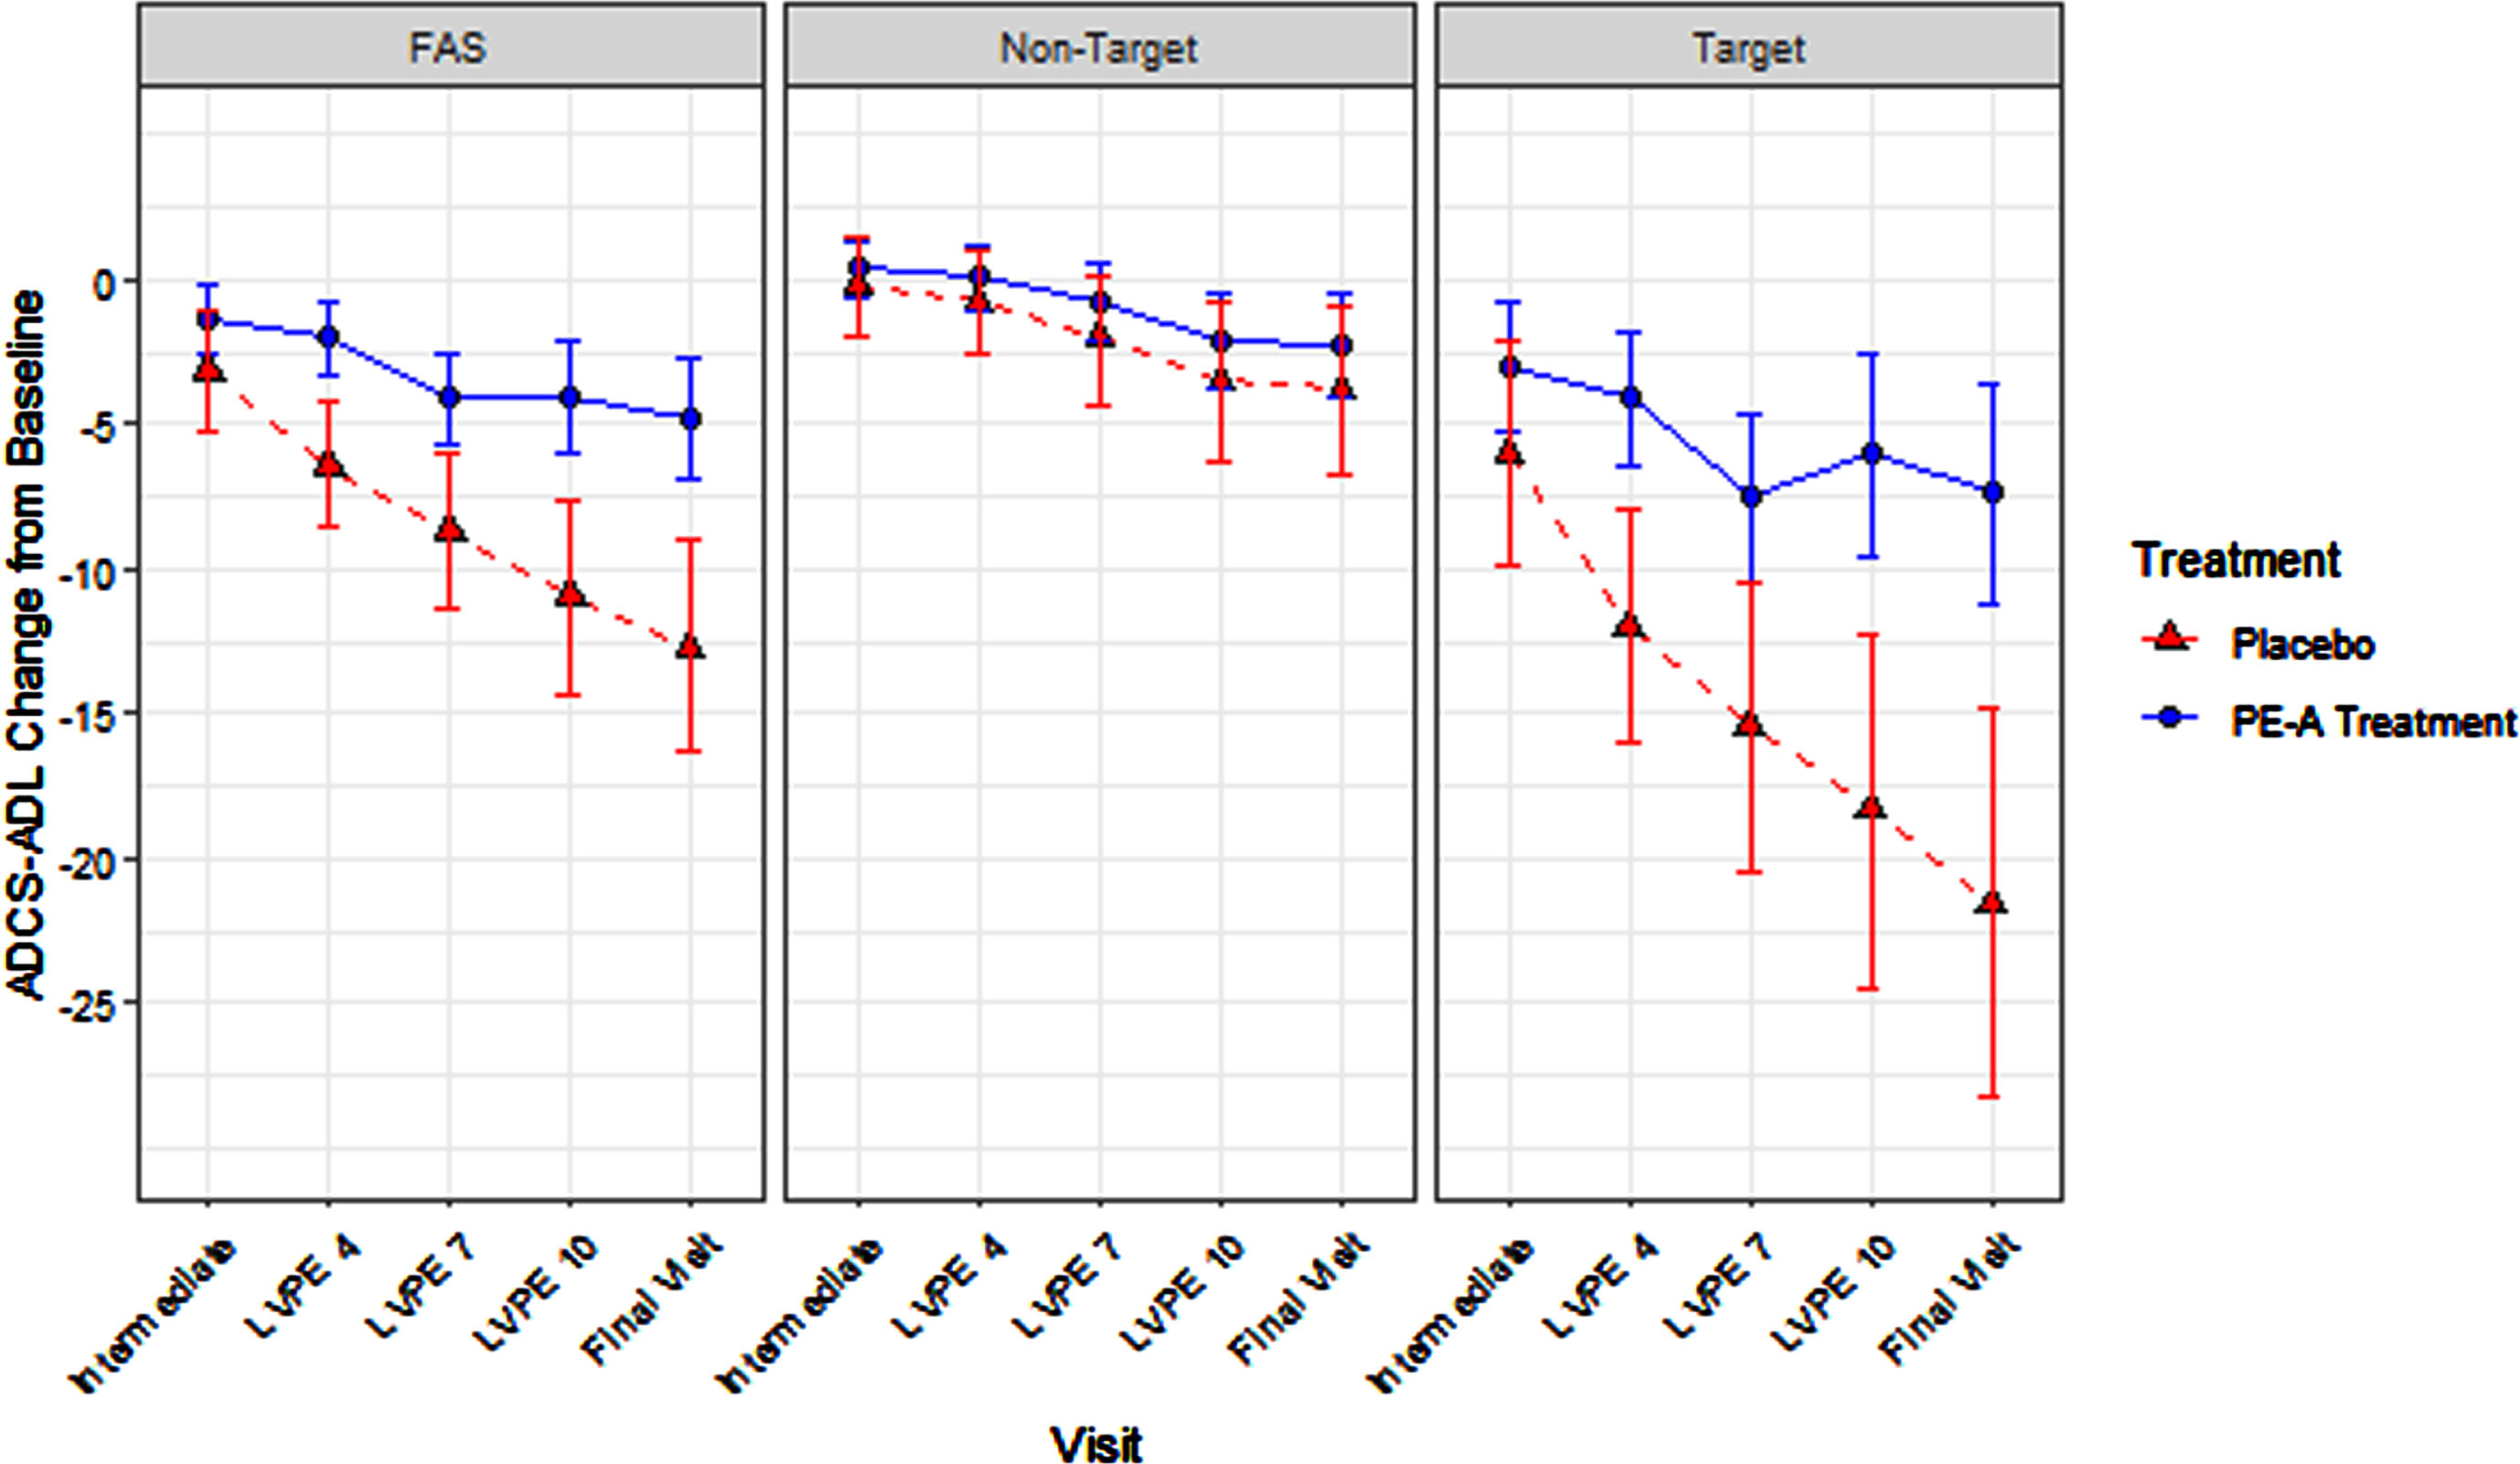 ADCS-ADL Total Score: Treatment Effect in FAS, Target, and Non-Target Stages.